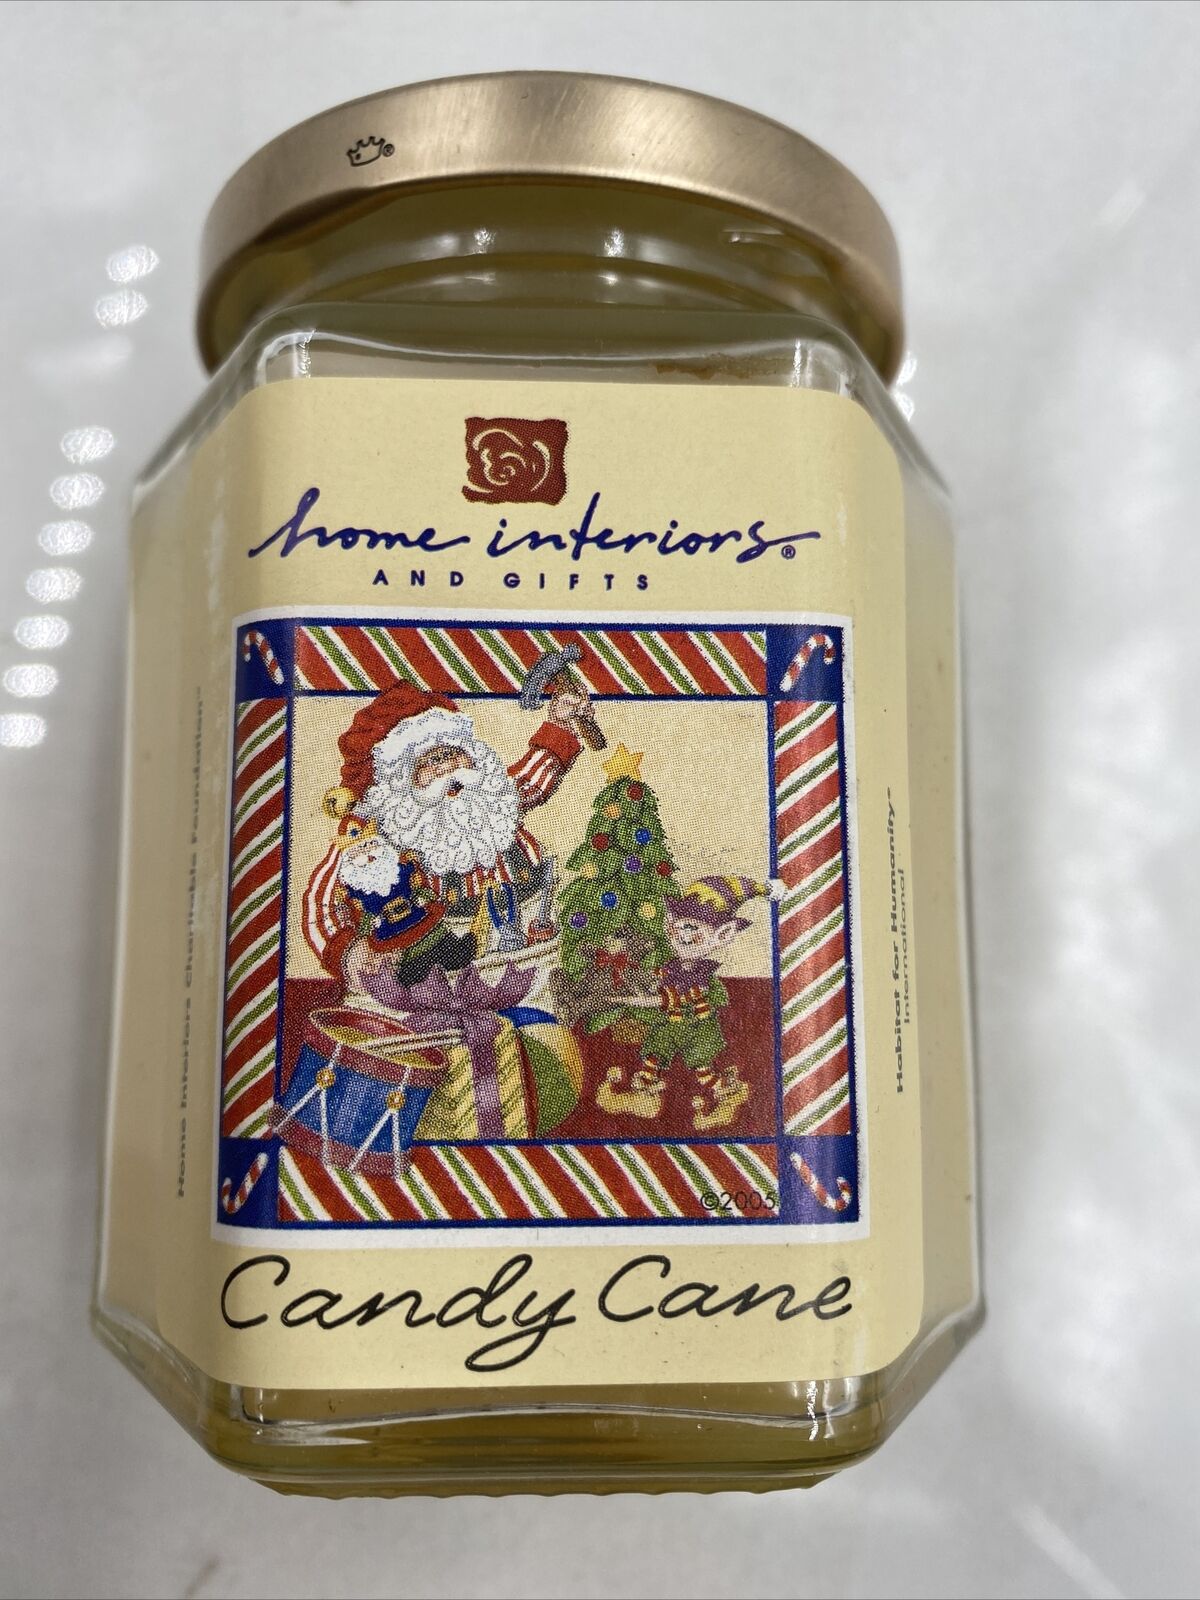 VINTAGE HOME INTERIORS JAR CANDLE Candy Cane 7.5 OUNCE New